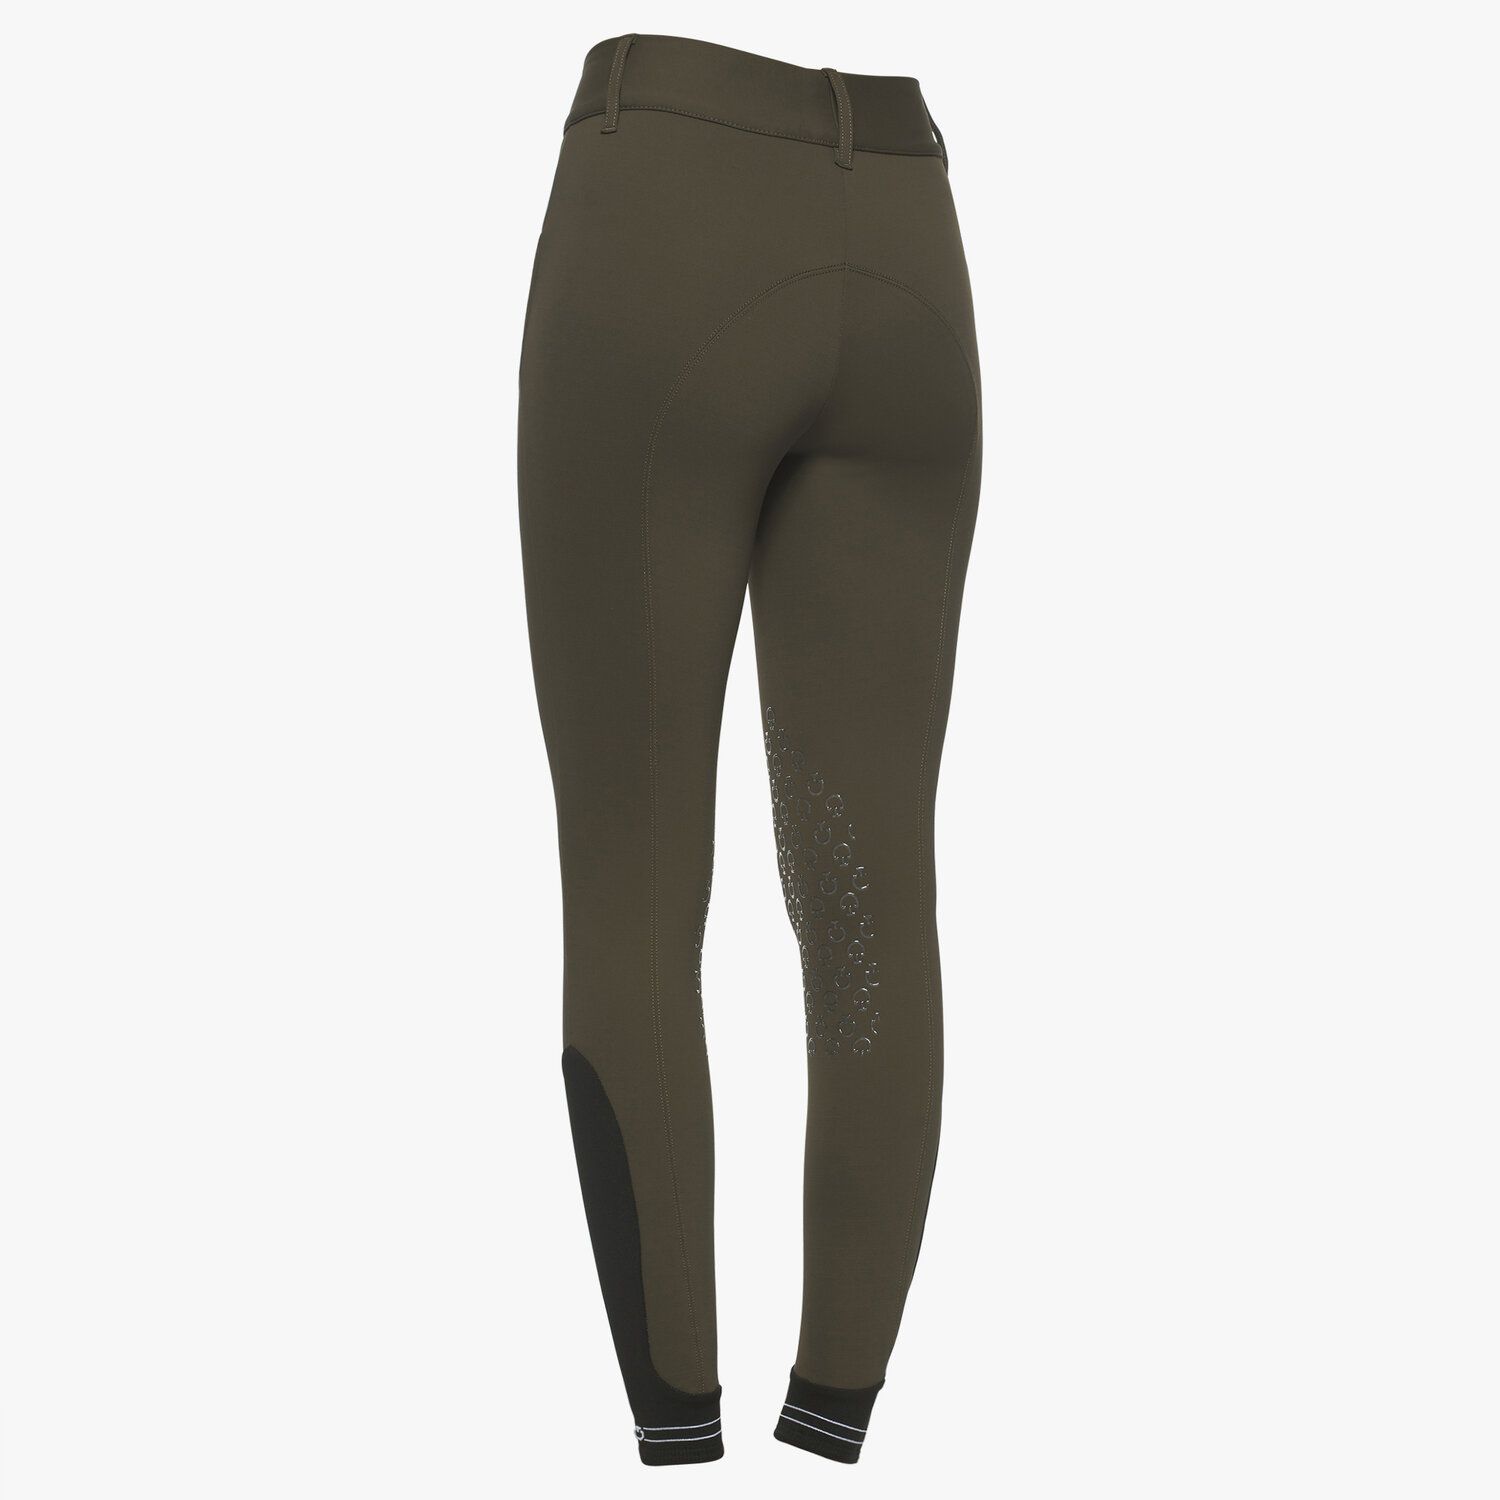 Cavalleria Toscana Women's dressage breeches with perforated logo tape MILITARY GREEN-3